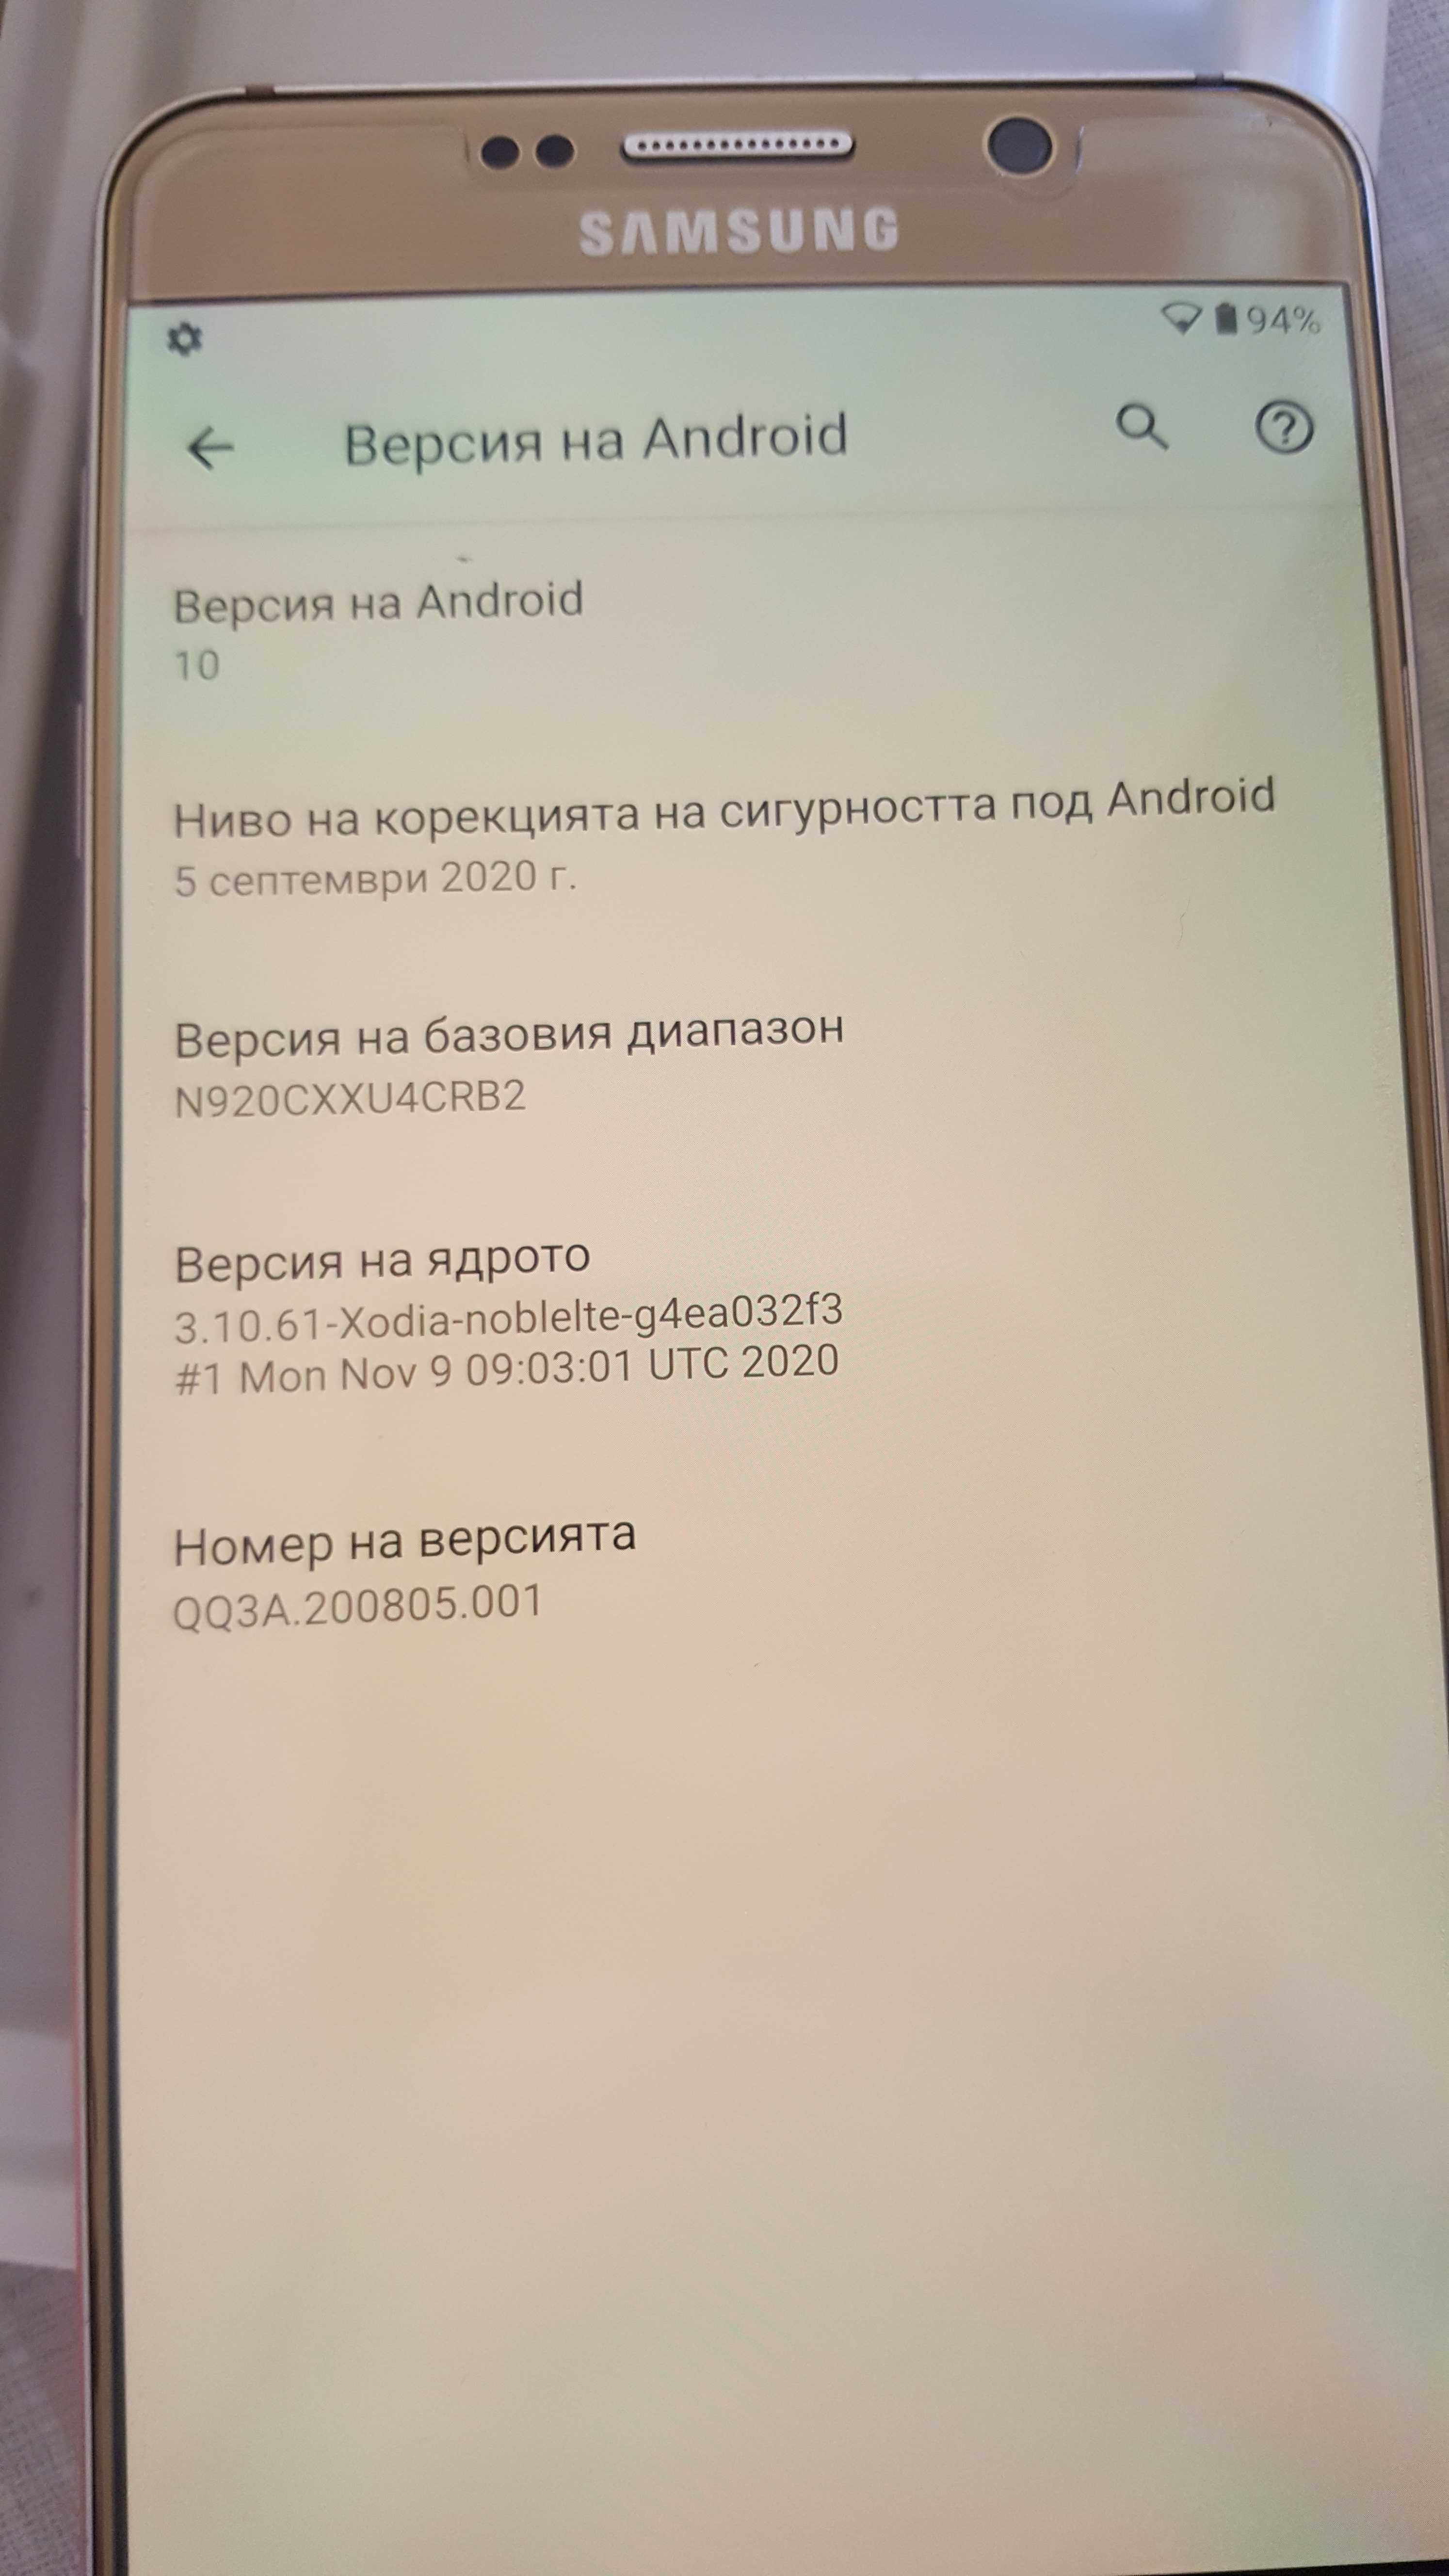 Samsung Note 5 Android 10